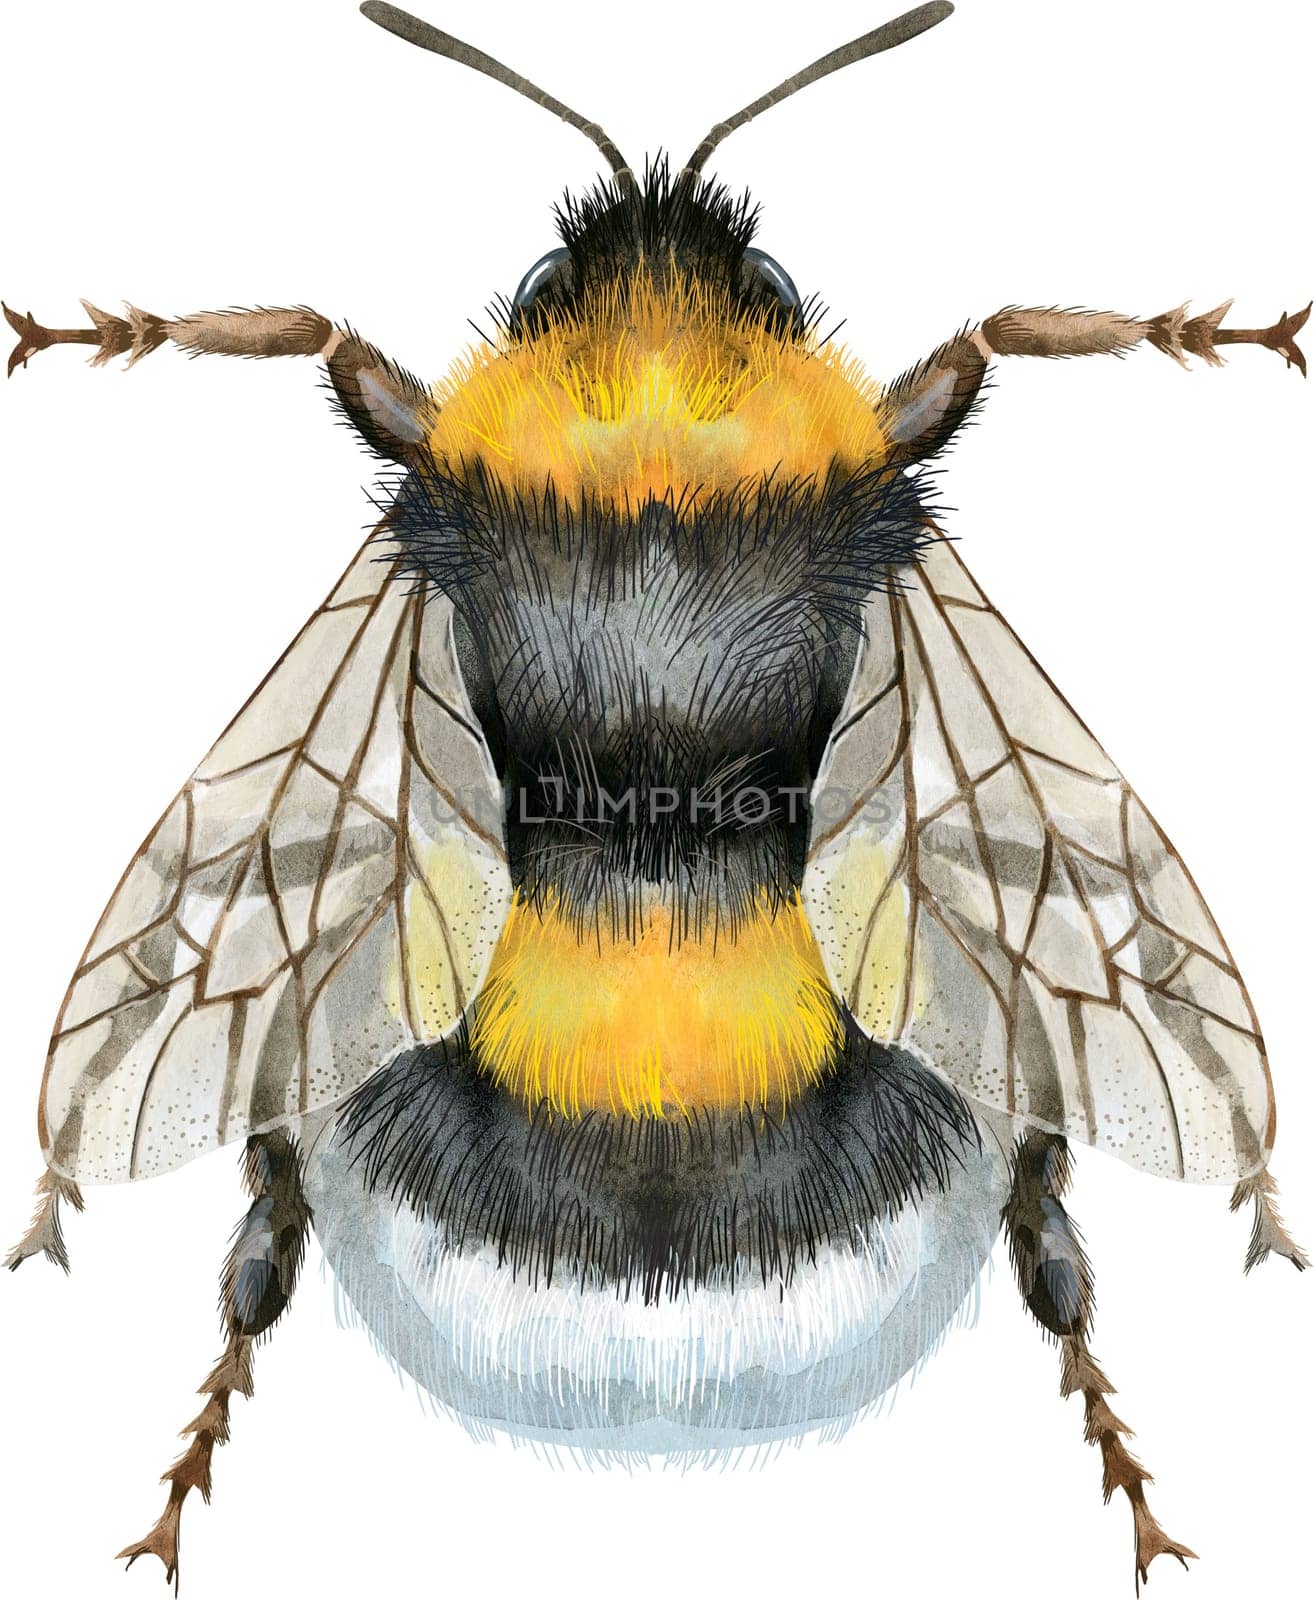 Bumblebee watercolor illustration. Watercolor painting art. Hand painted. by NataOmsk